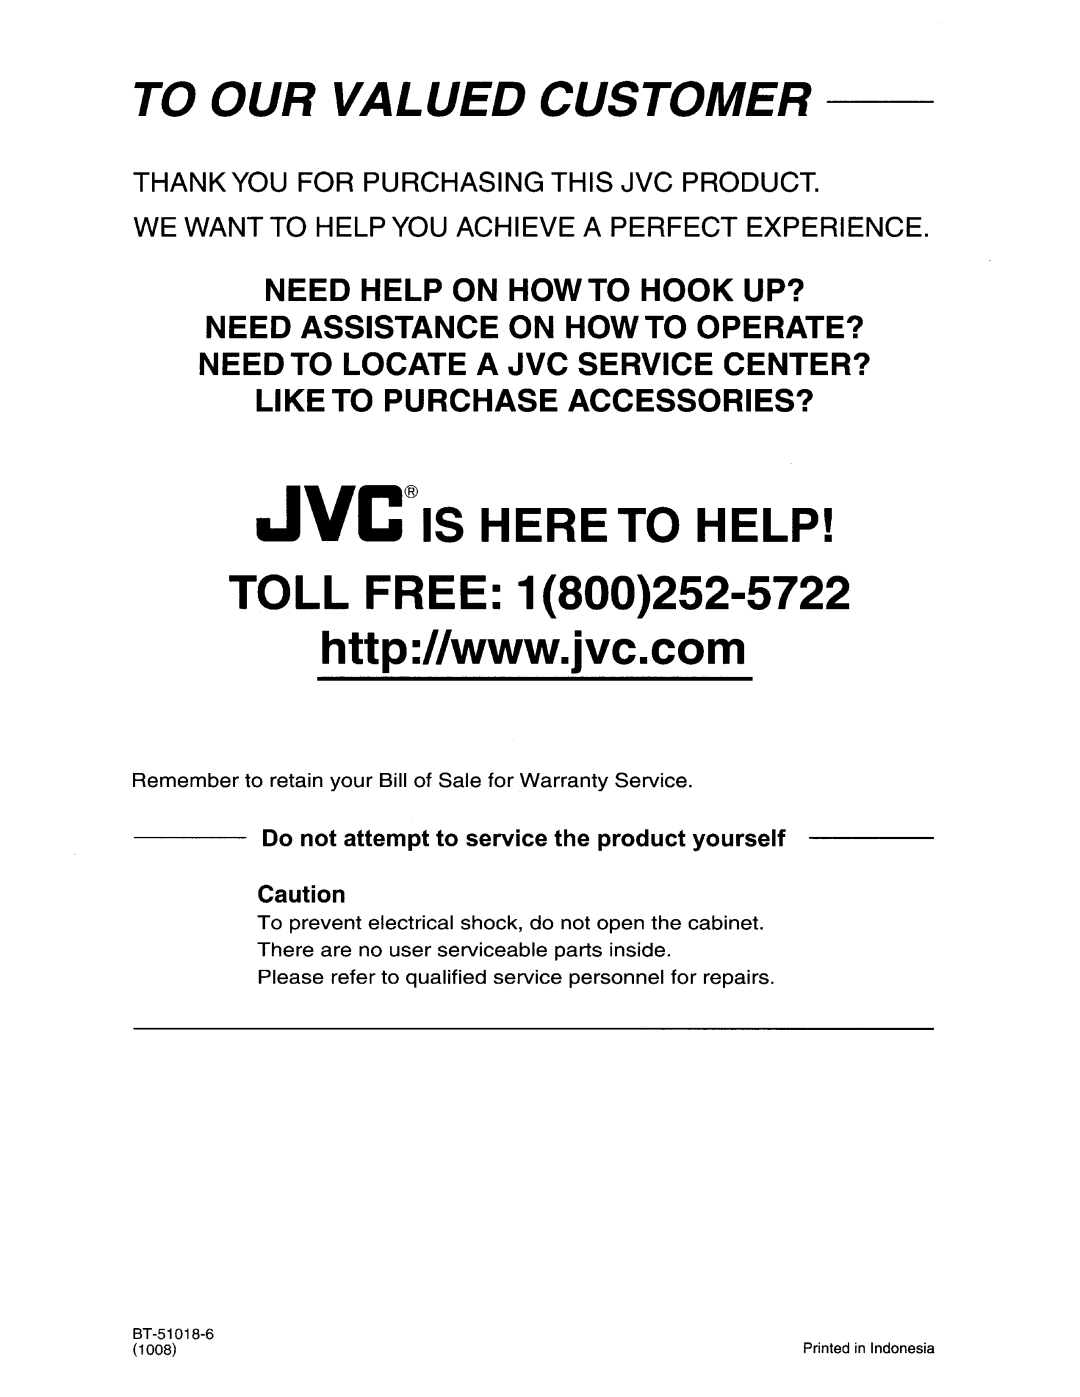 JVC KW-AVX838, KW-AVX830 manual Jvcis Hereto Help Toll Free, Need Help On How To Hook Up?, Like To Purchase Accessories? 